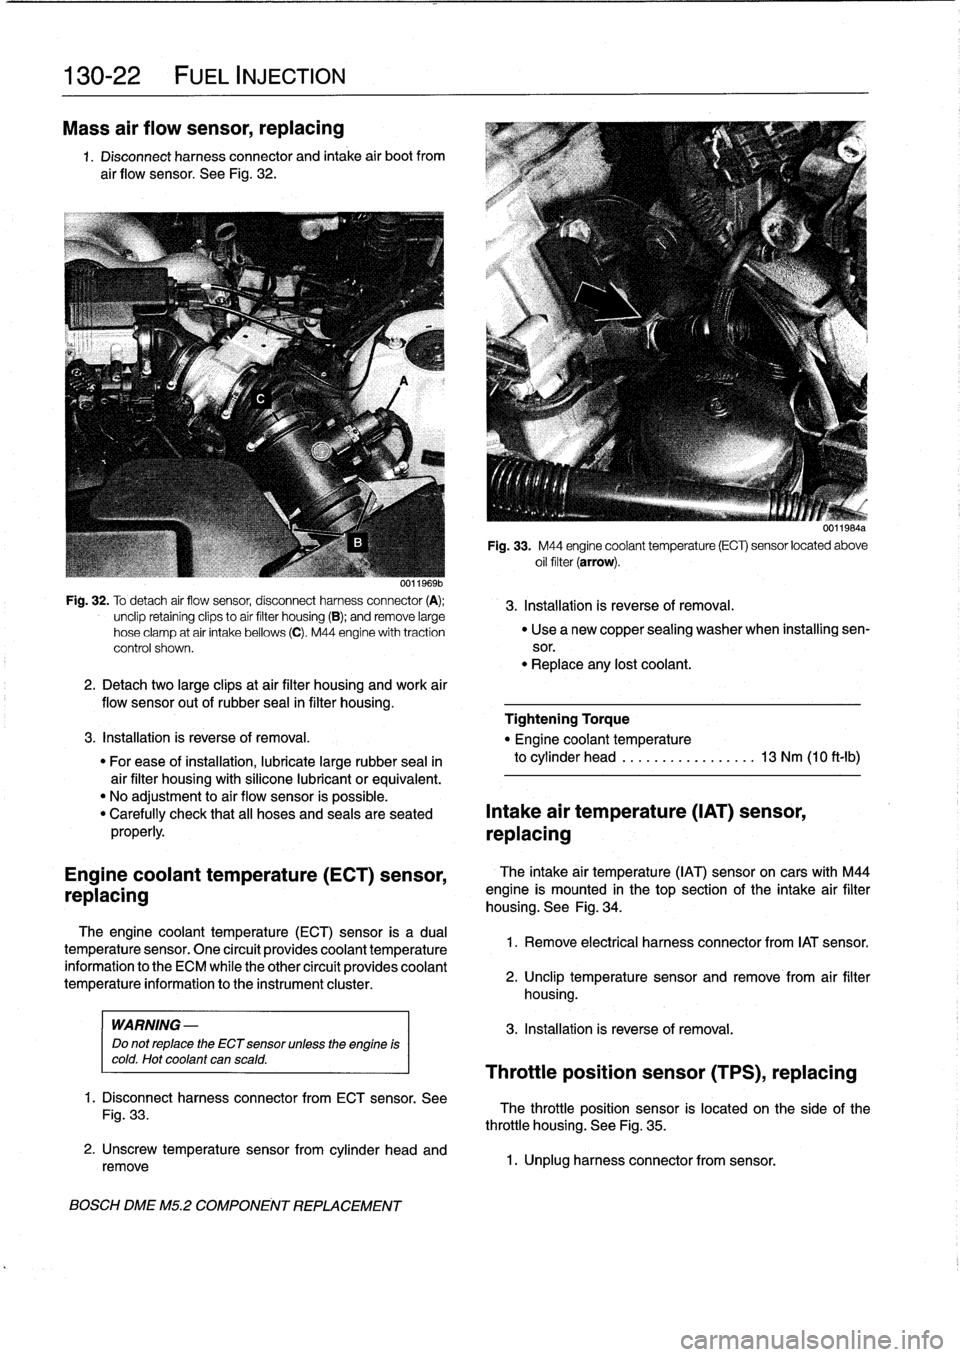 BMW 323i 1996 E36 Workshop Manual 
130-
2
2

	

FUEL
INJECTION

Mass
air
flow
sensor,
replacing

1
.
Disconnect
harness
connector
and
intake
air
bootfrom

air
flow
sensor
.
See
Fig
.
32
.

Fig
.
32
.
To
detach
air
flow
sensor,
disconn